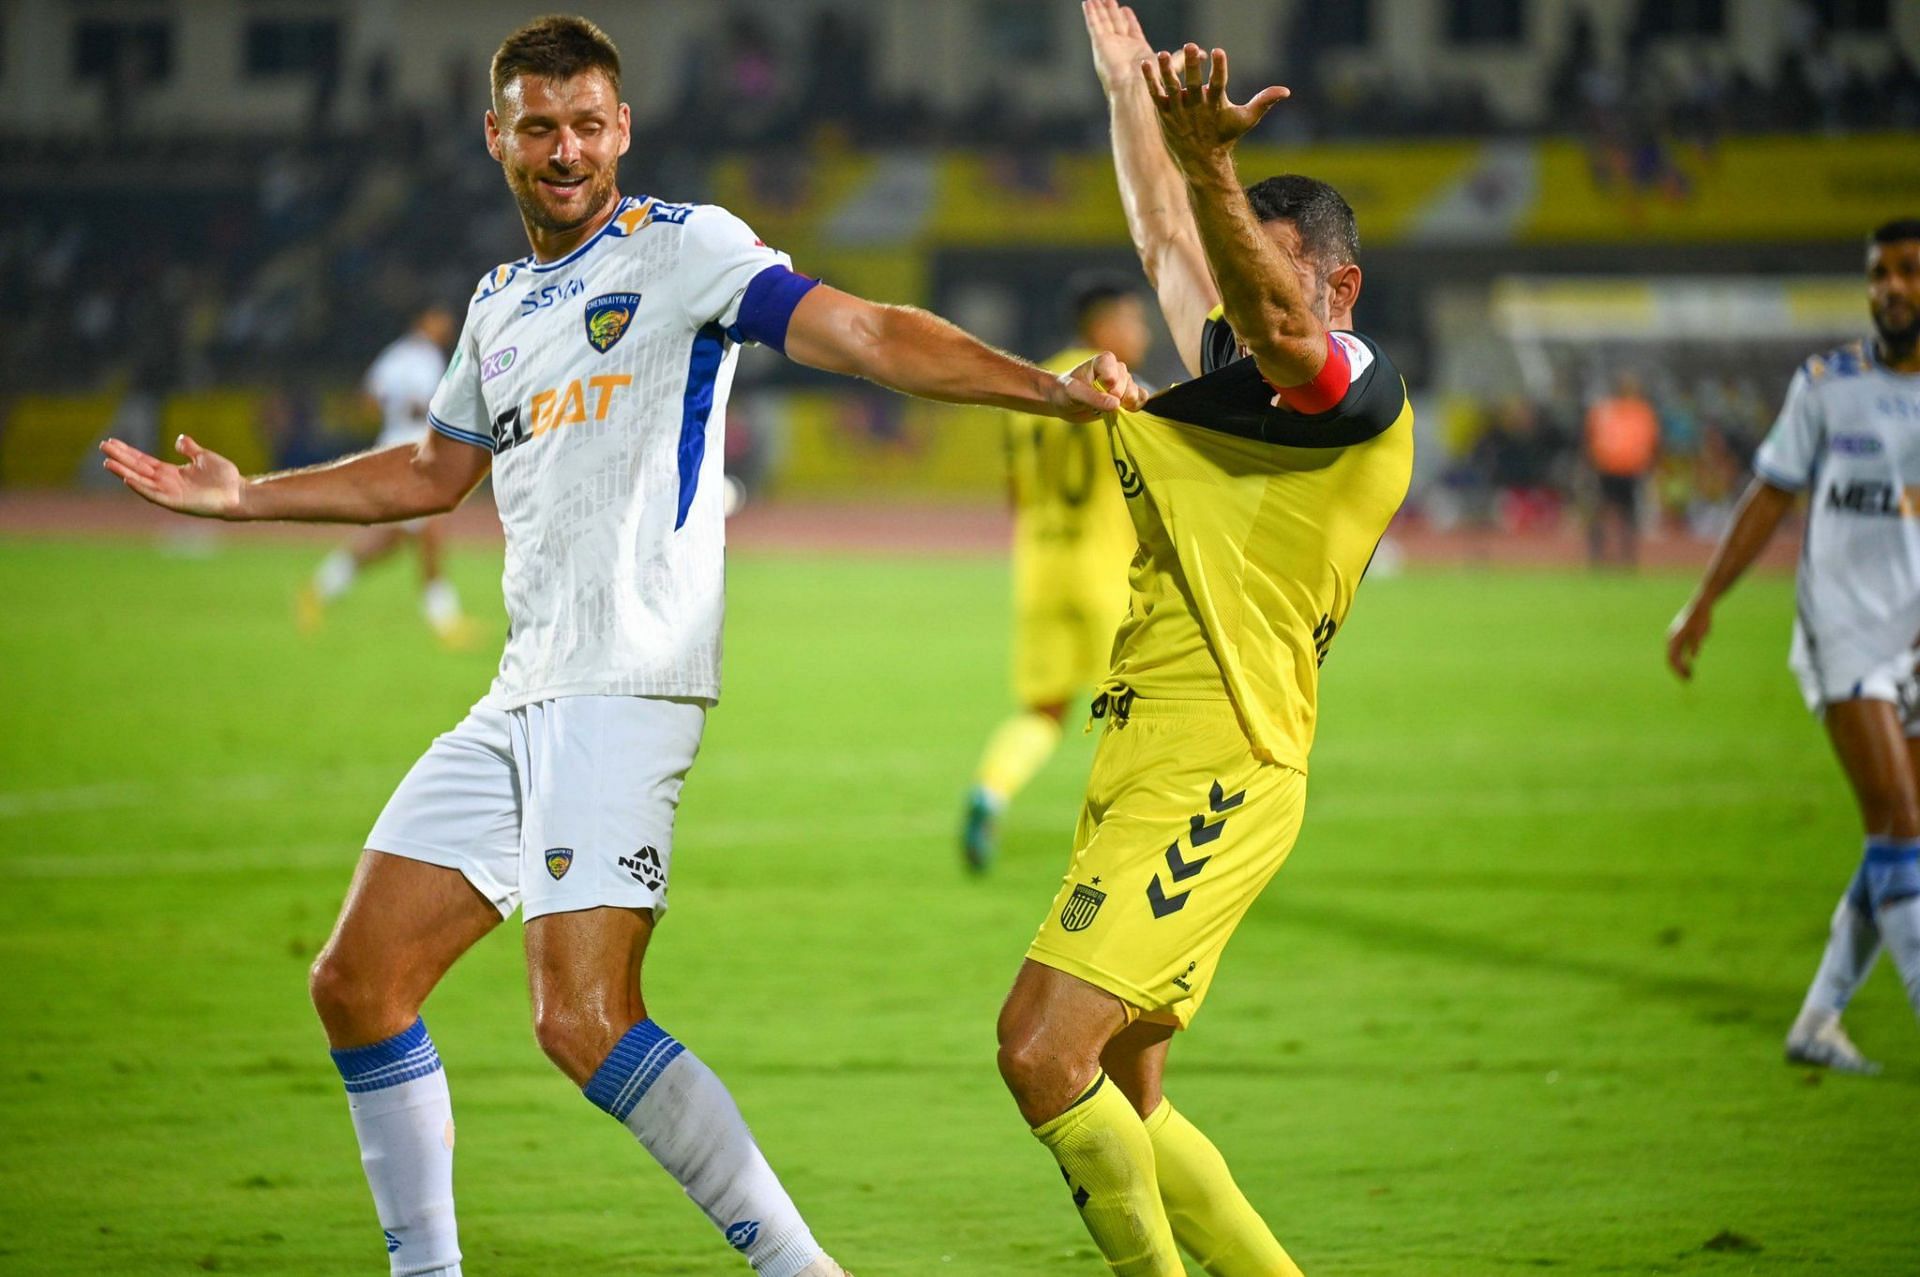 Manager Owen Coyle&#039;s tactics of playing rough worked well for Chennaiyin FC on Monday. (PC: HFC)